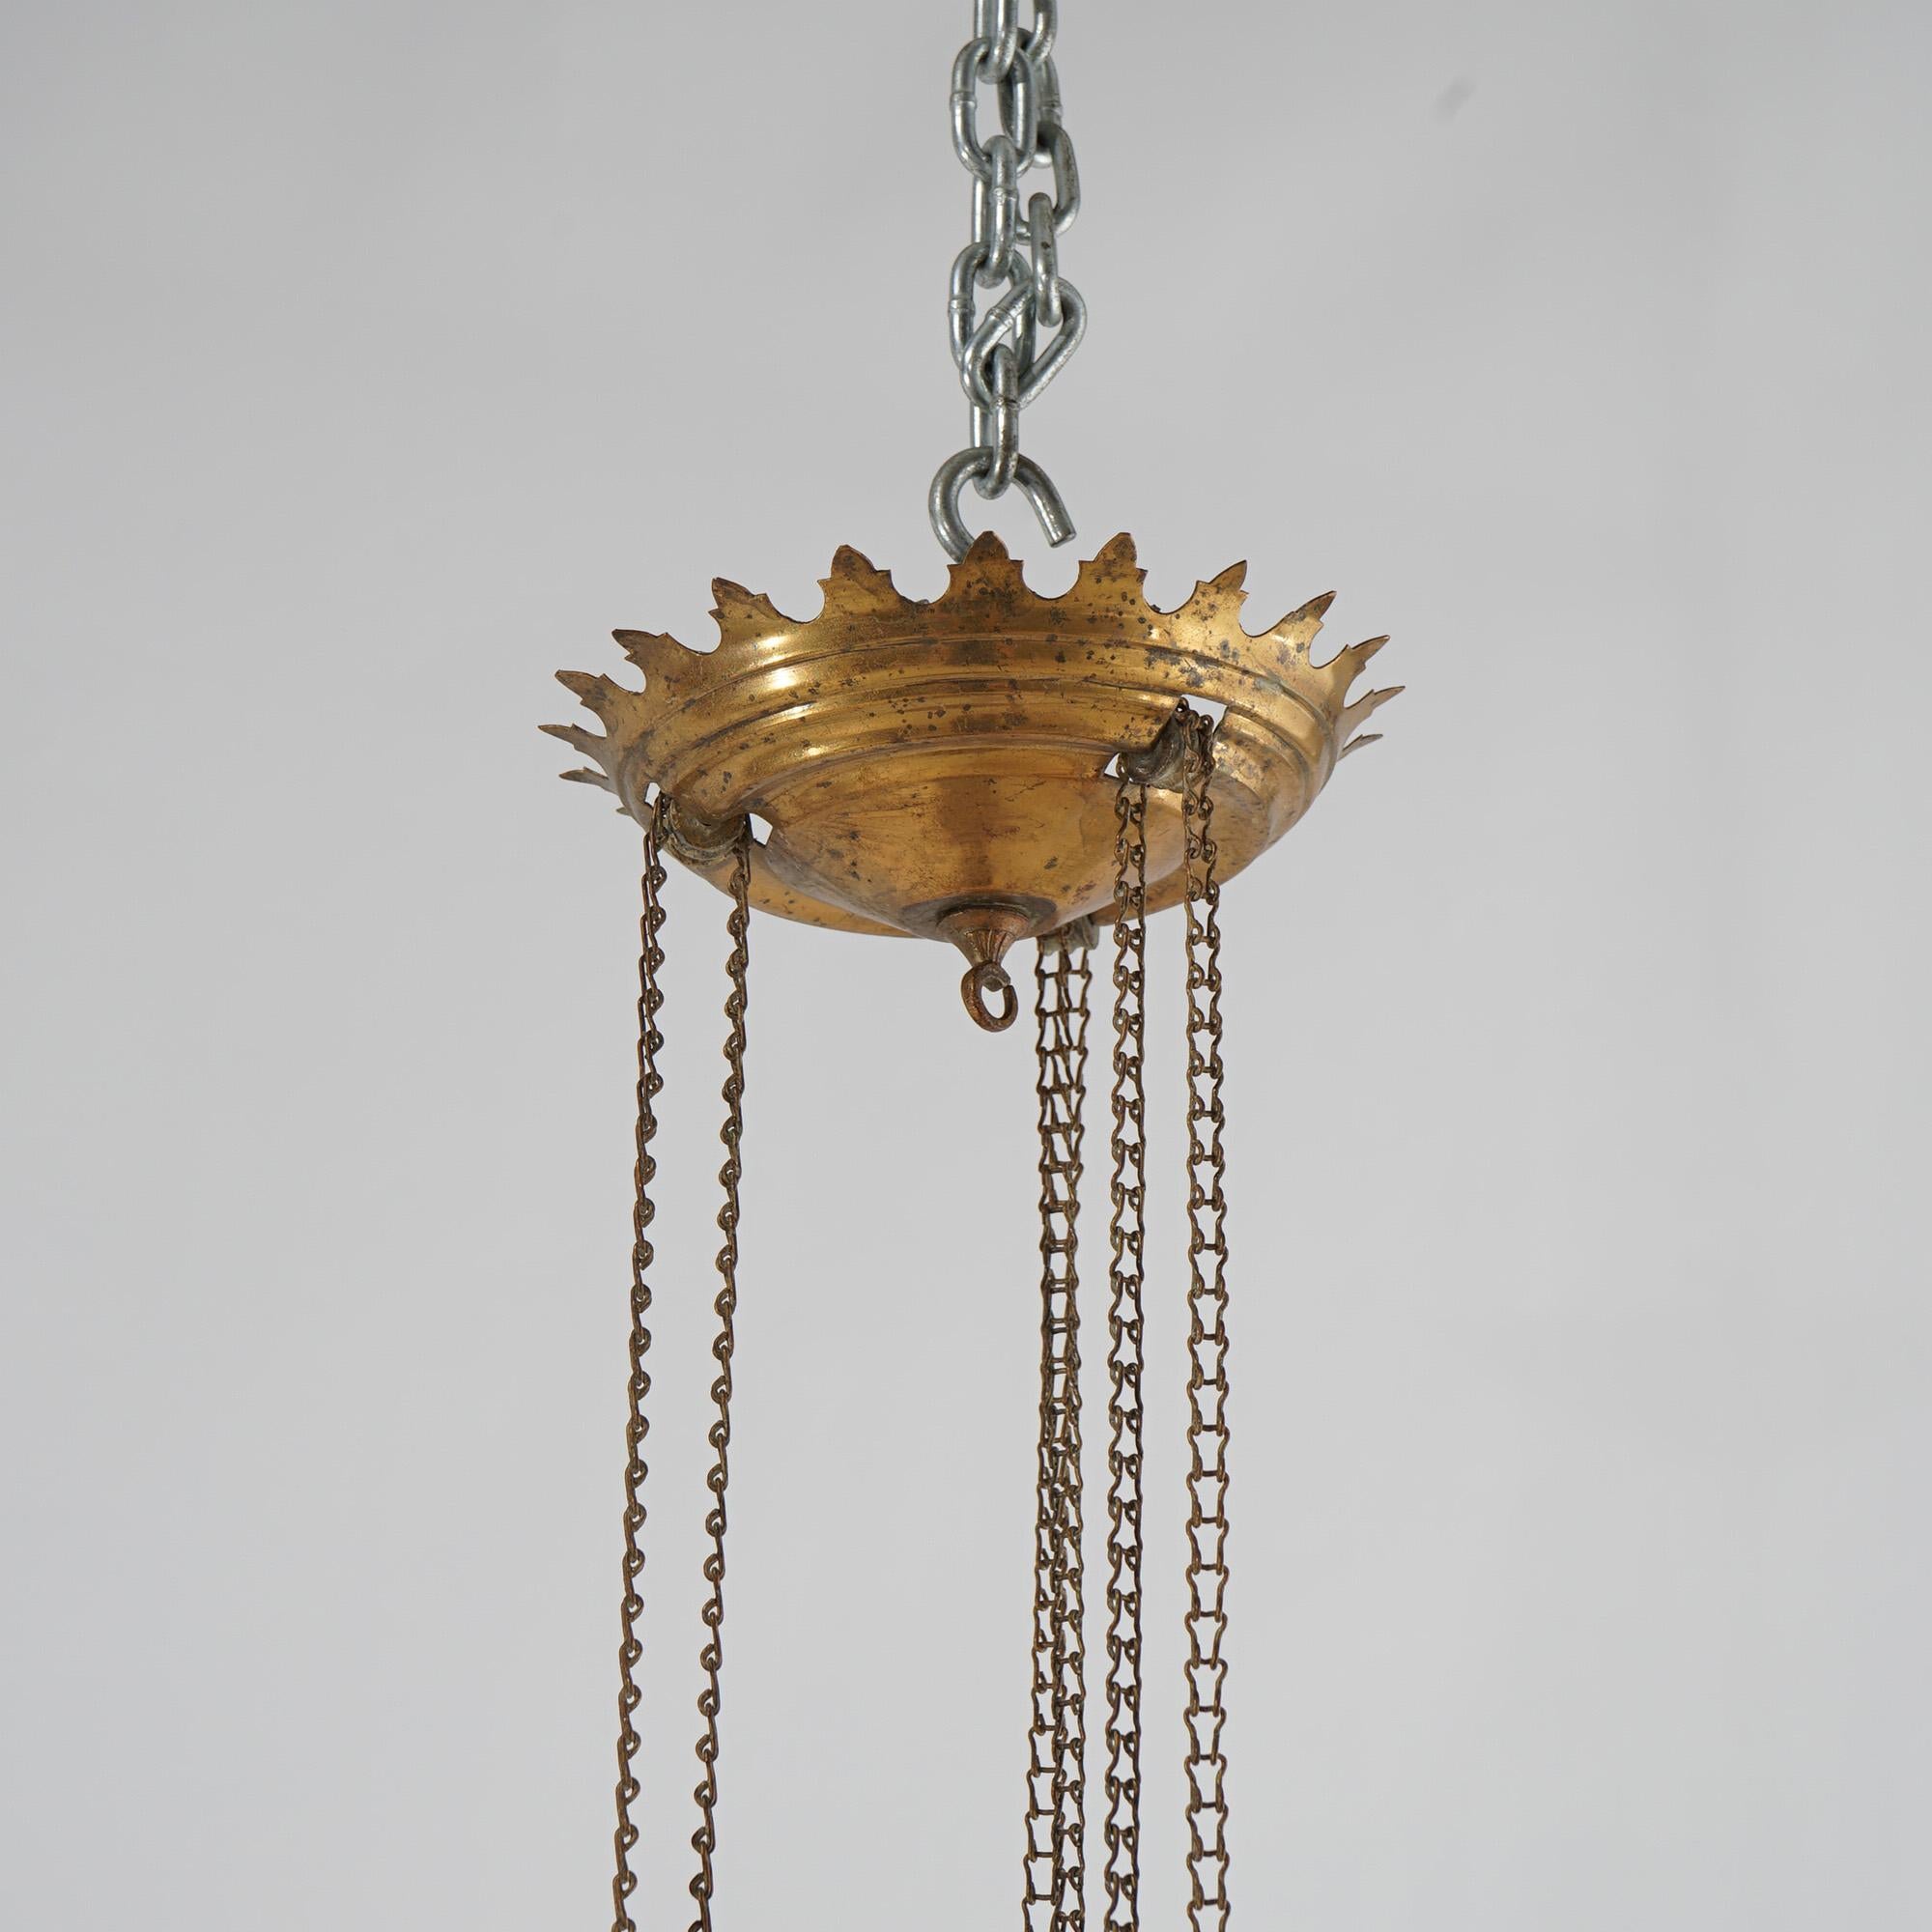 Antique Victorian Opalescent Vaseline Glass & Brass Hanging Hall Lamp Circa 1880 For Sale 3